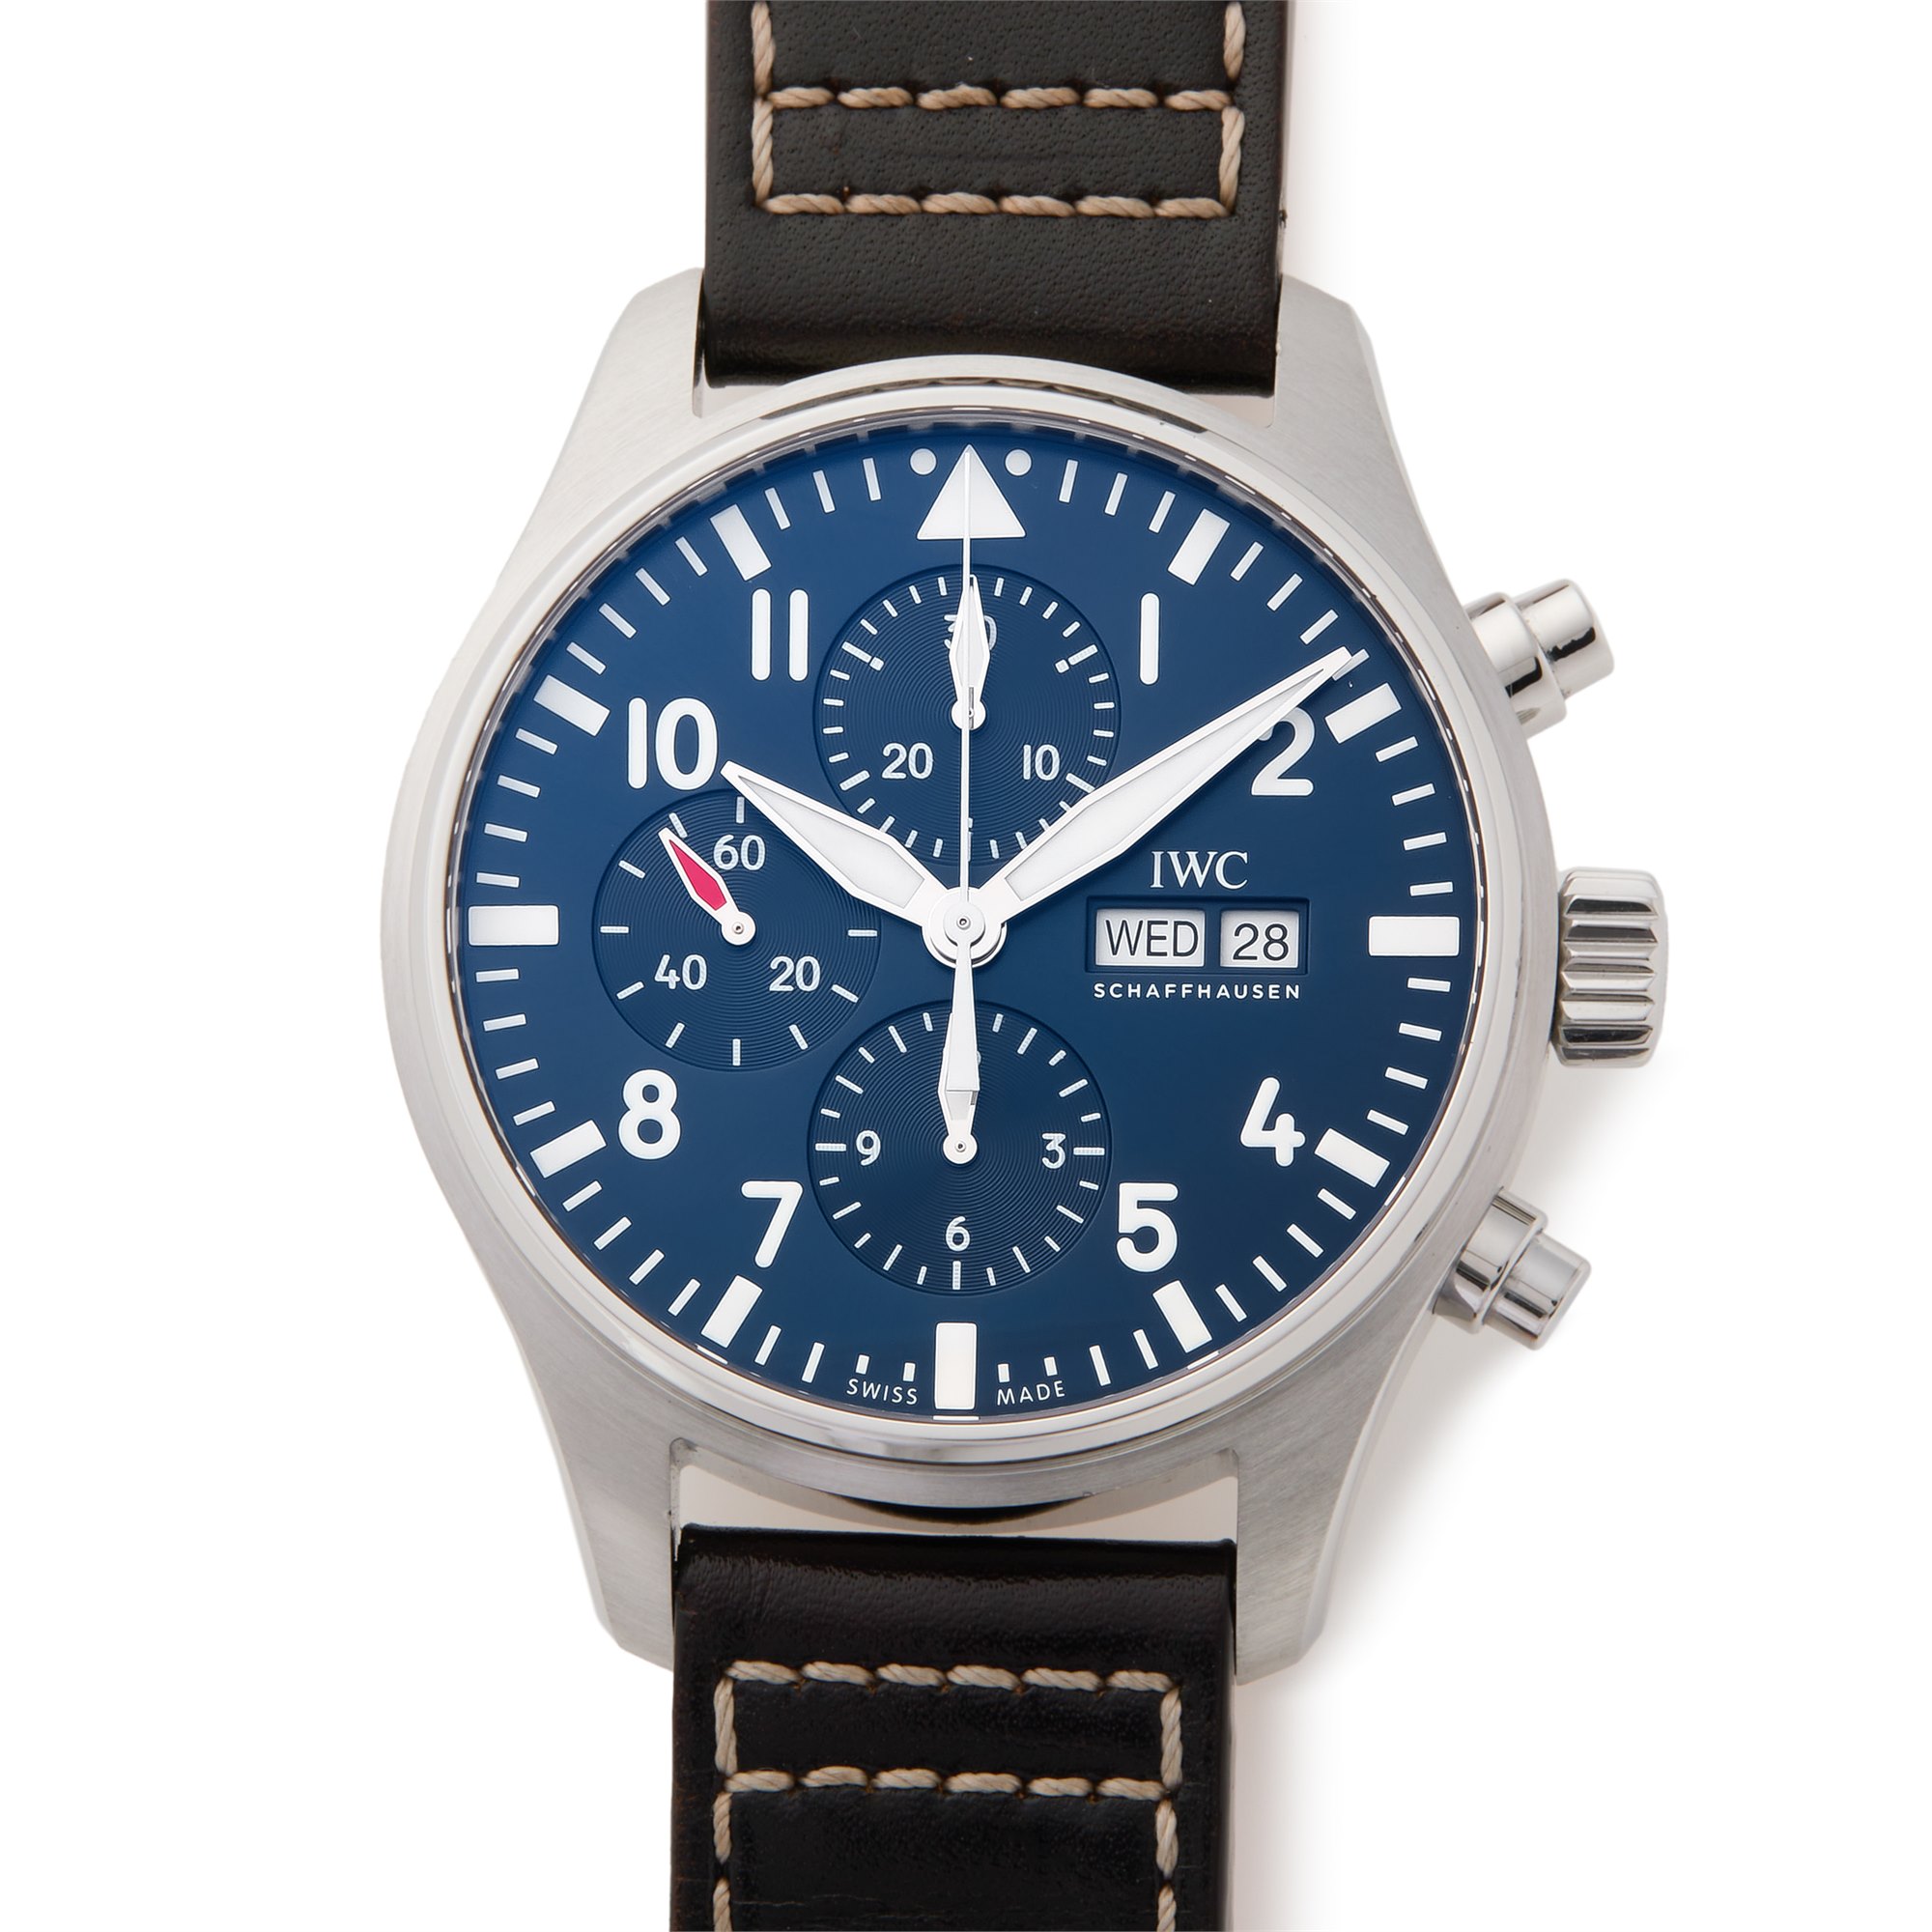 IWC Fliegeruhr Chronograph Pilot Chronograph Stainless Steel IW377714